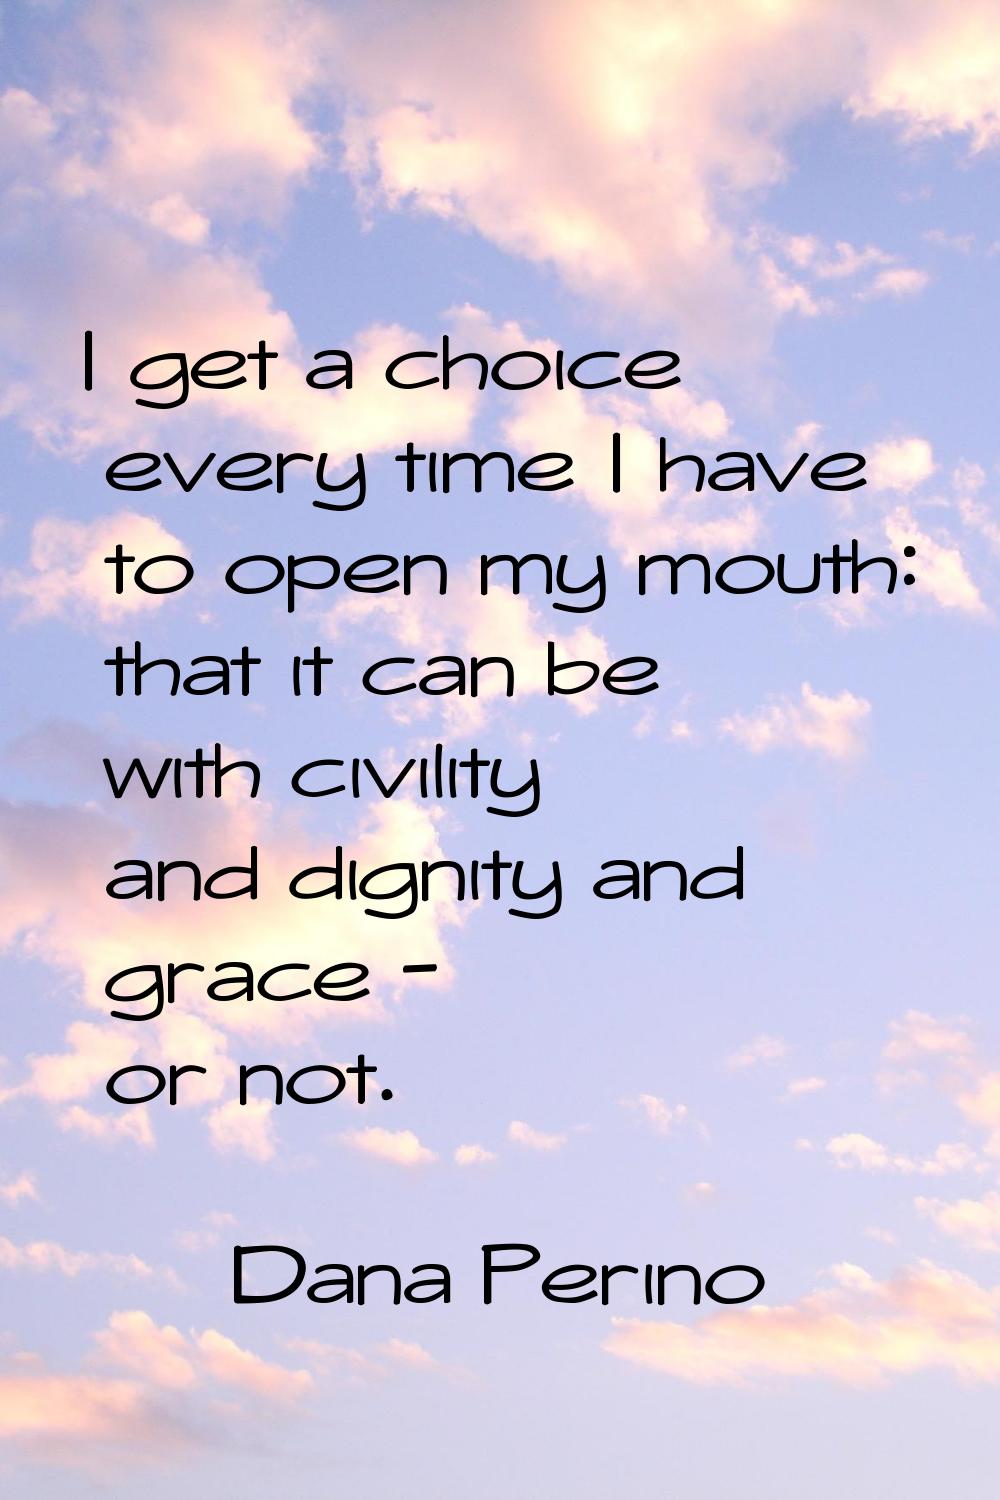 I get a choice every time I have to open my mouth: that it can be with civility and dignity and gra